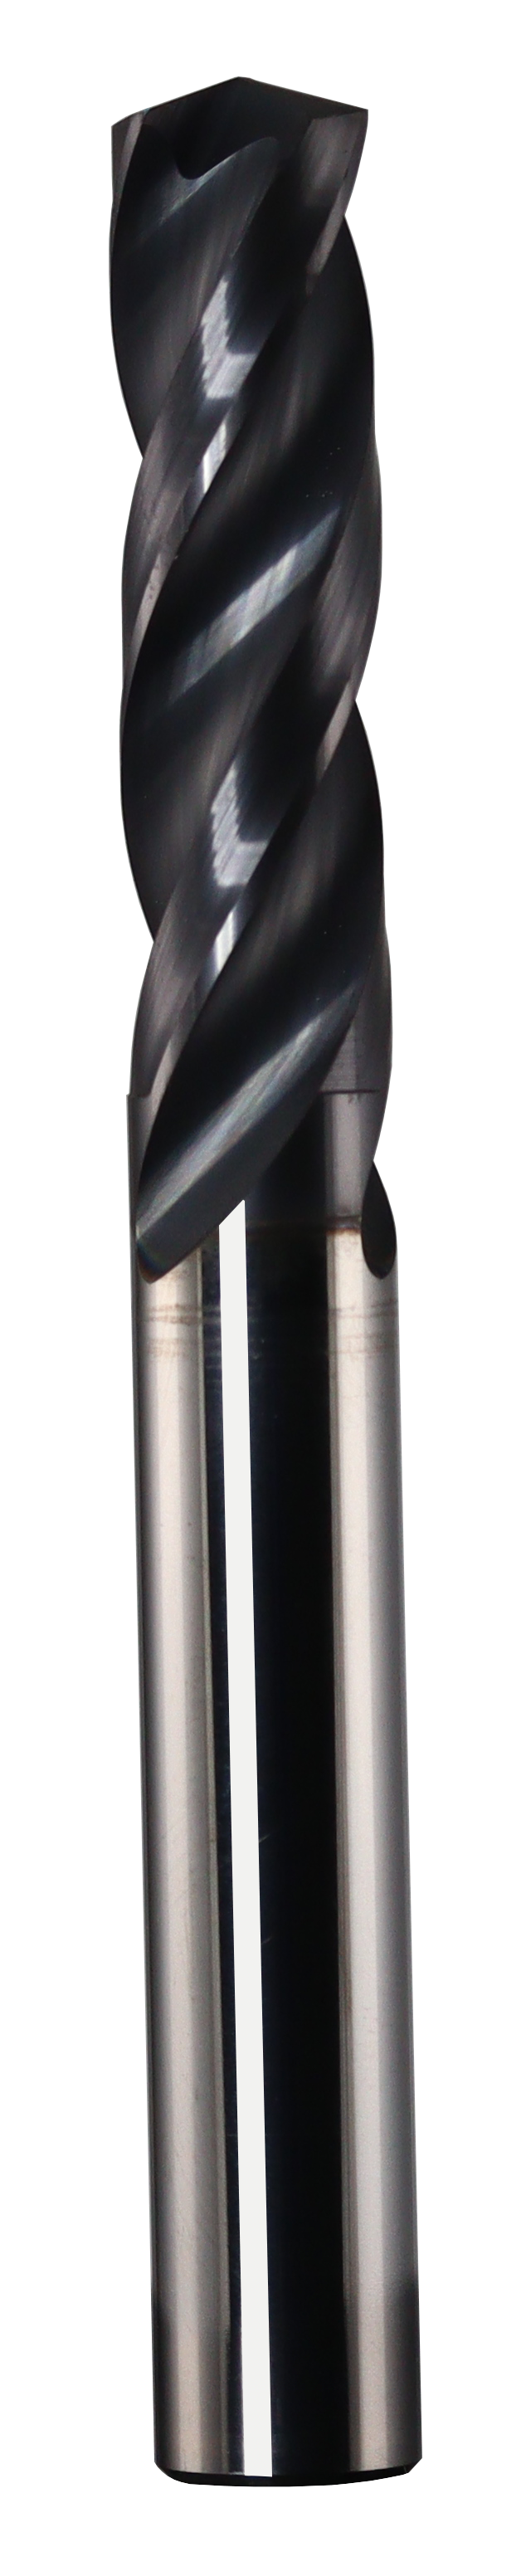 12.00mm Dia, 150 Degree Point, Solid Carbide Drill - 69044